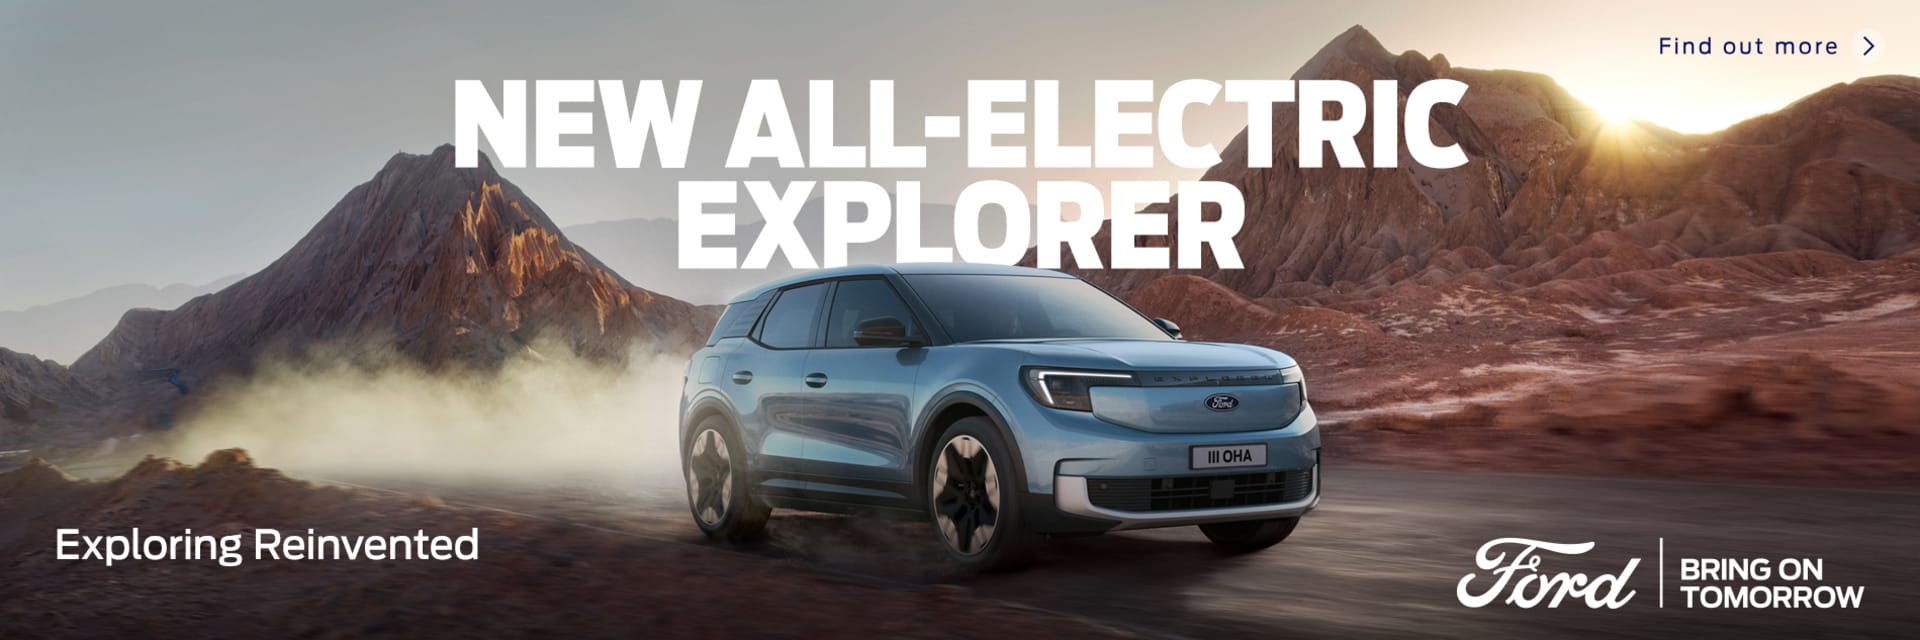 New All-Electic Ford Explorer